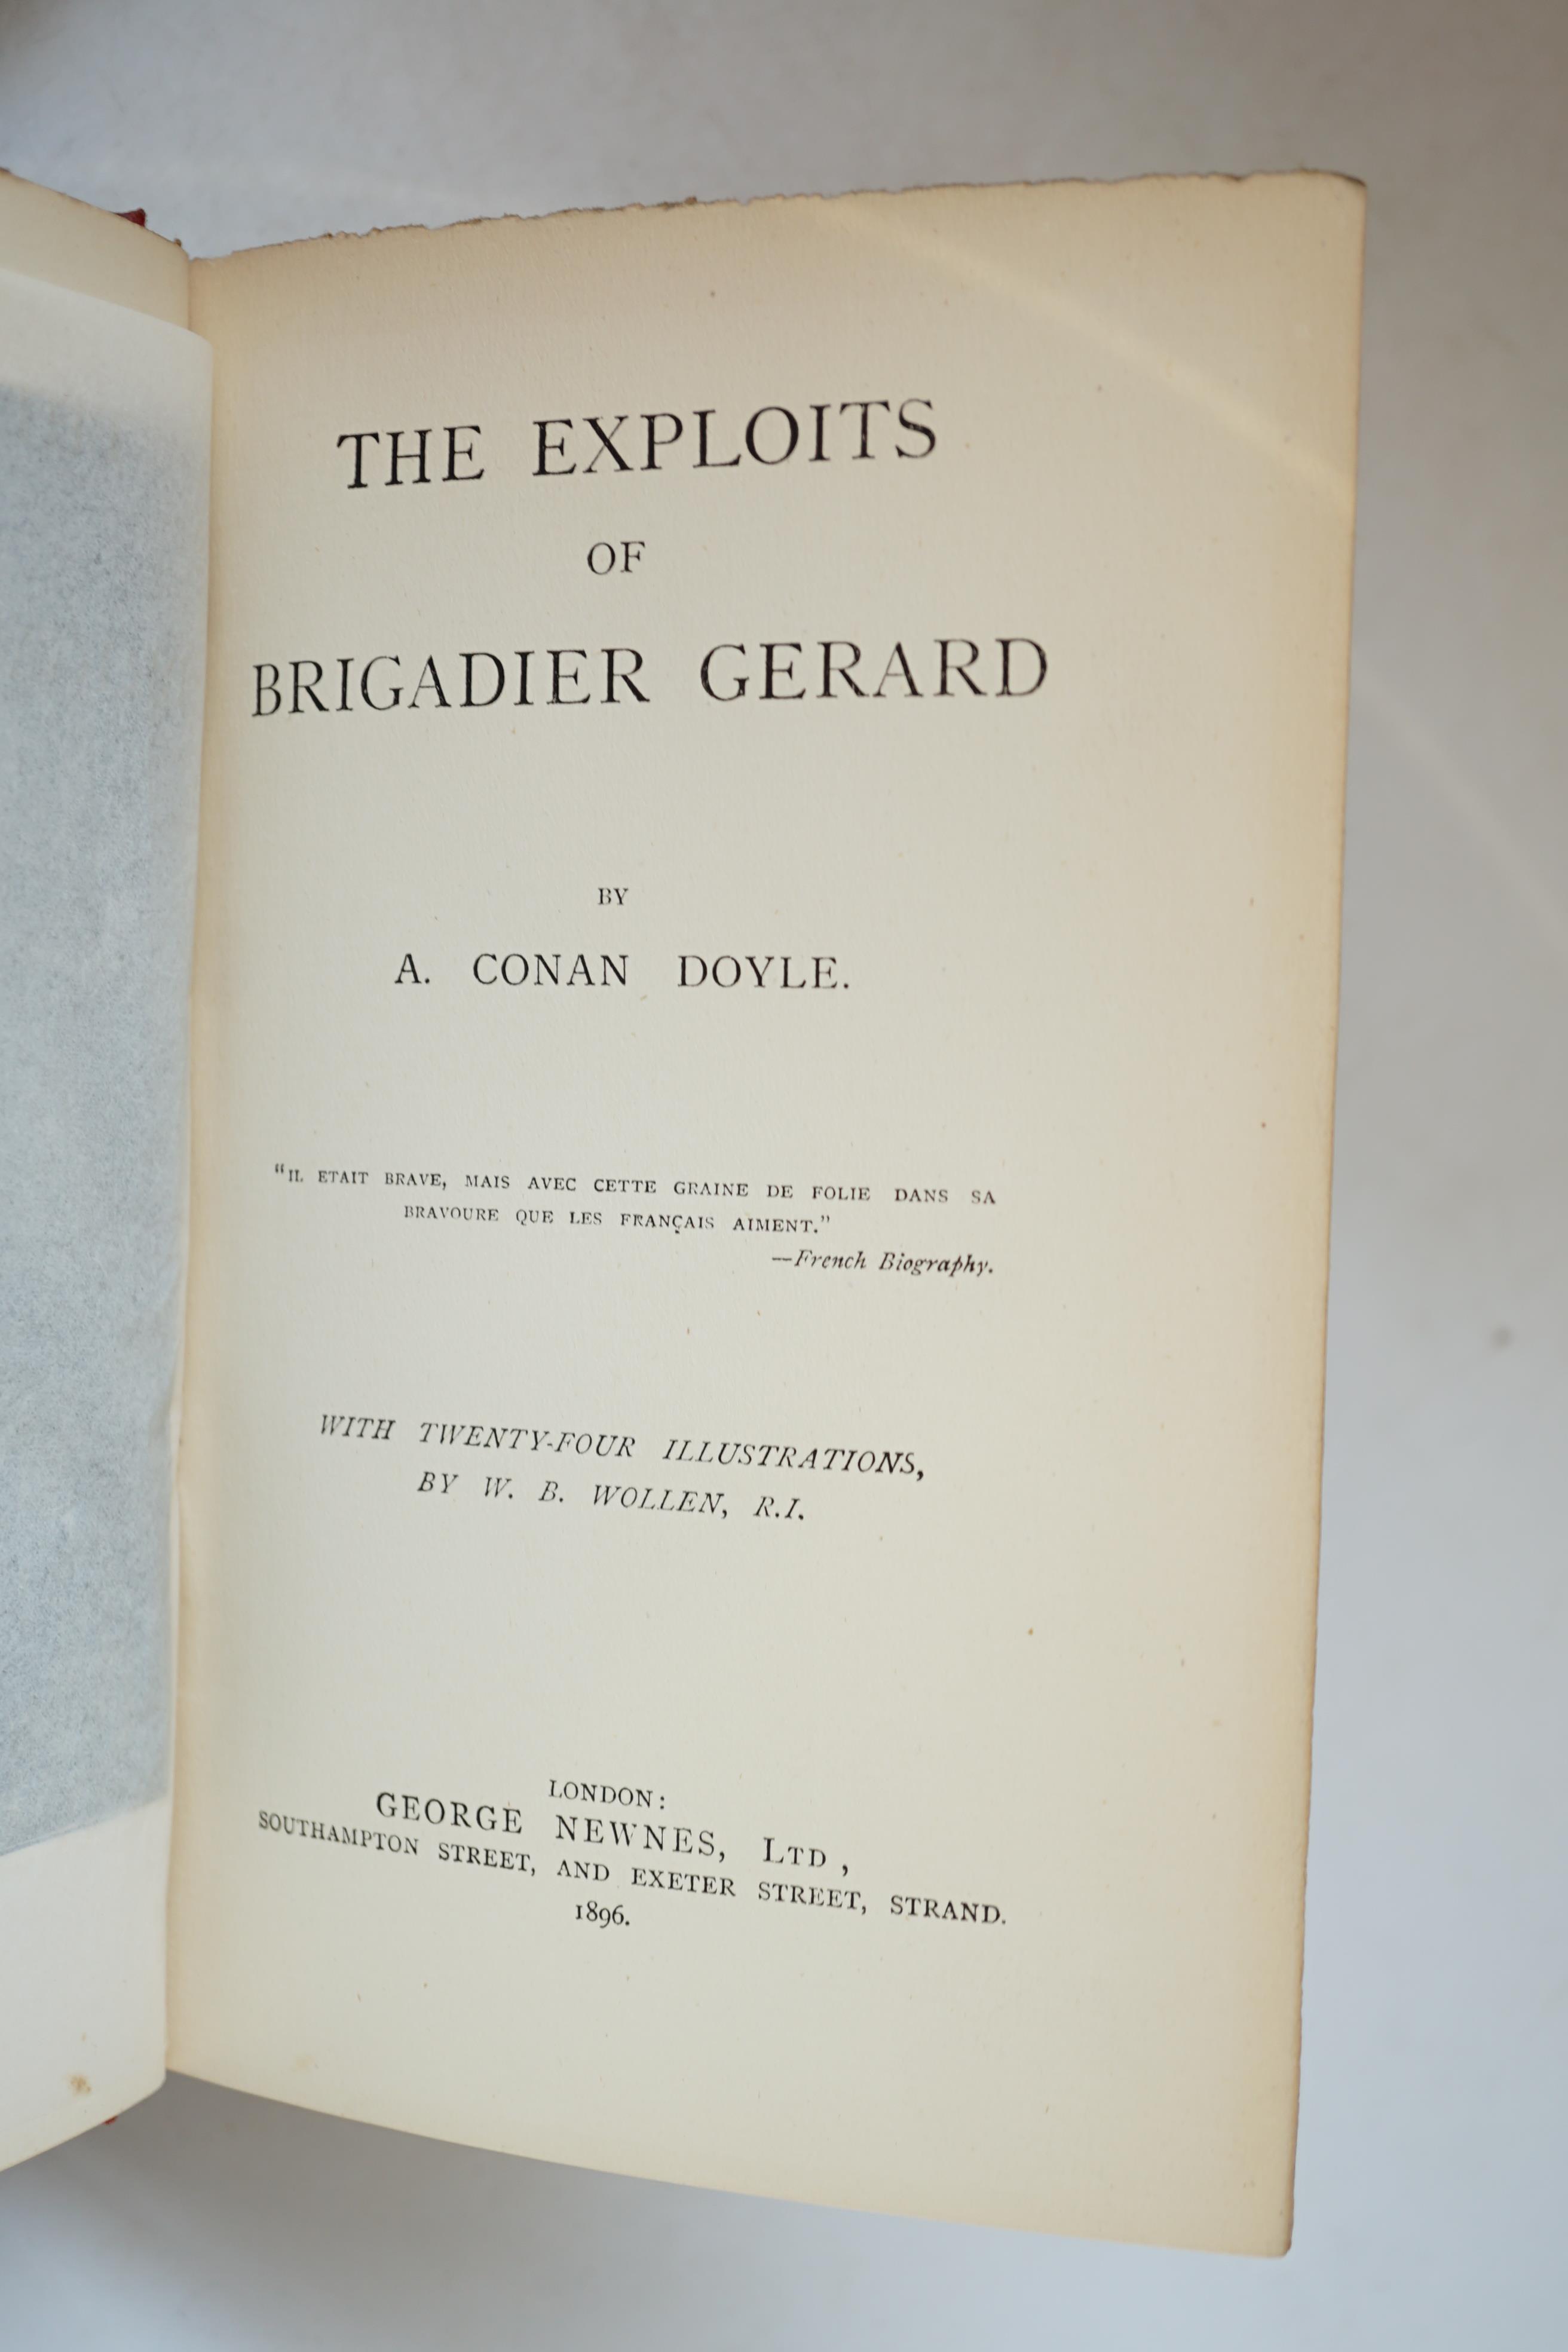 Doyle, Sir Arthur Conan -The Exploits of Brigadier Gerald, 1st edition, 8vo, red cloth gilt, with 24 illustrations by W.B. Wollen, bookplate to paste down, ink presentation inscription to front fly-leaf, George Newes, Lo